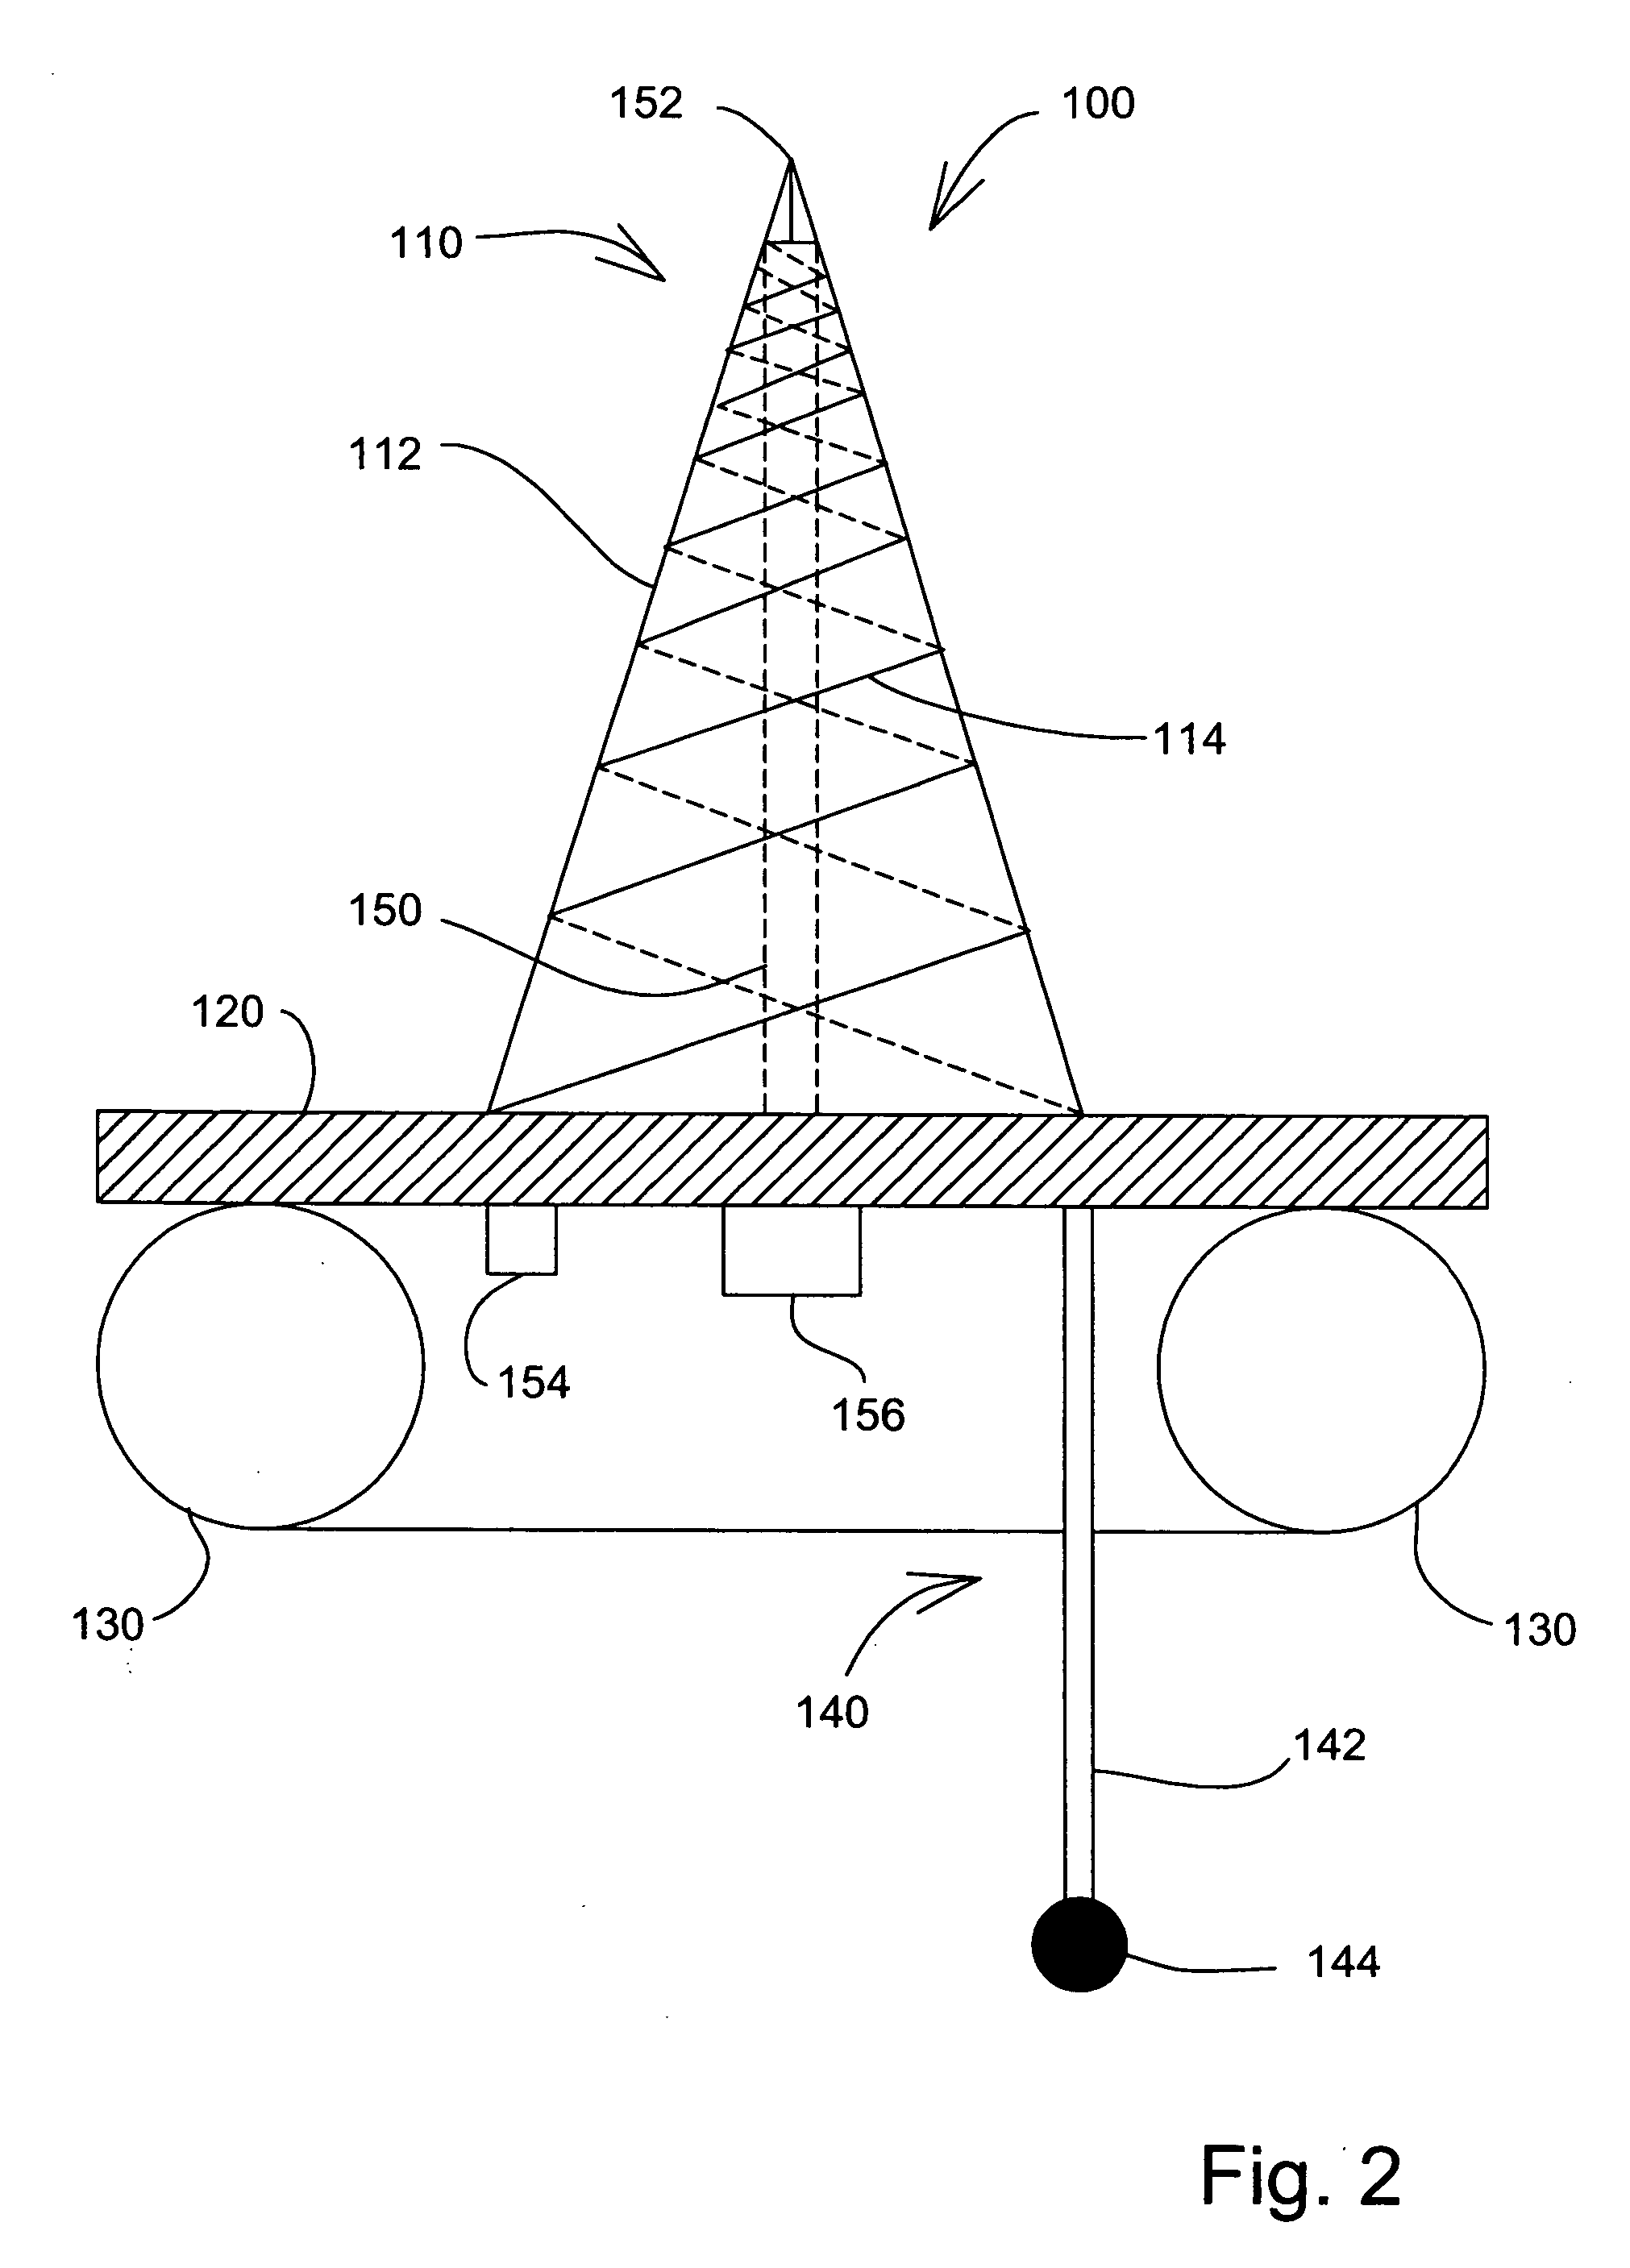 Inflatable antenna system